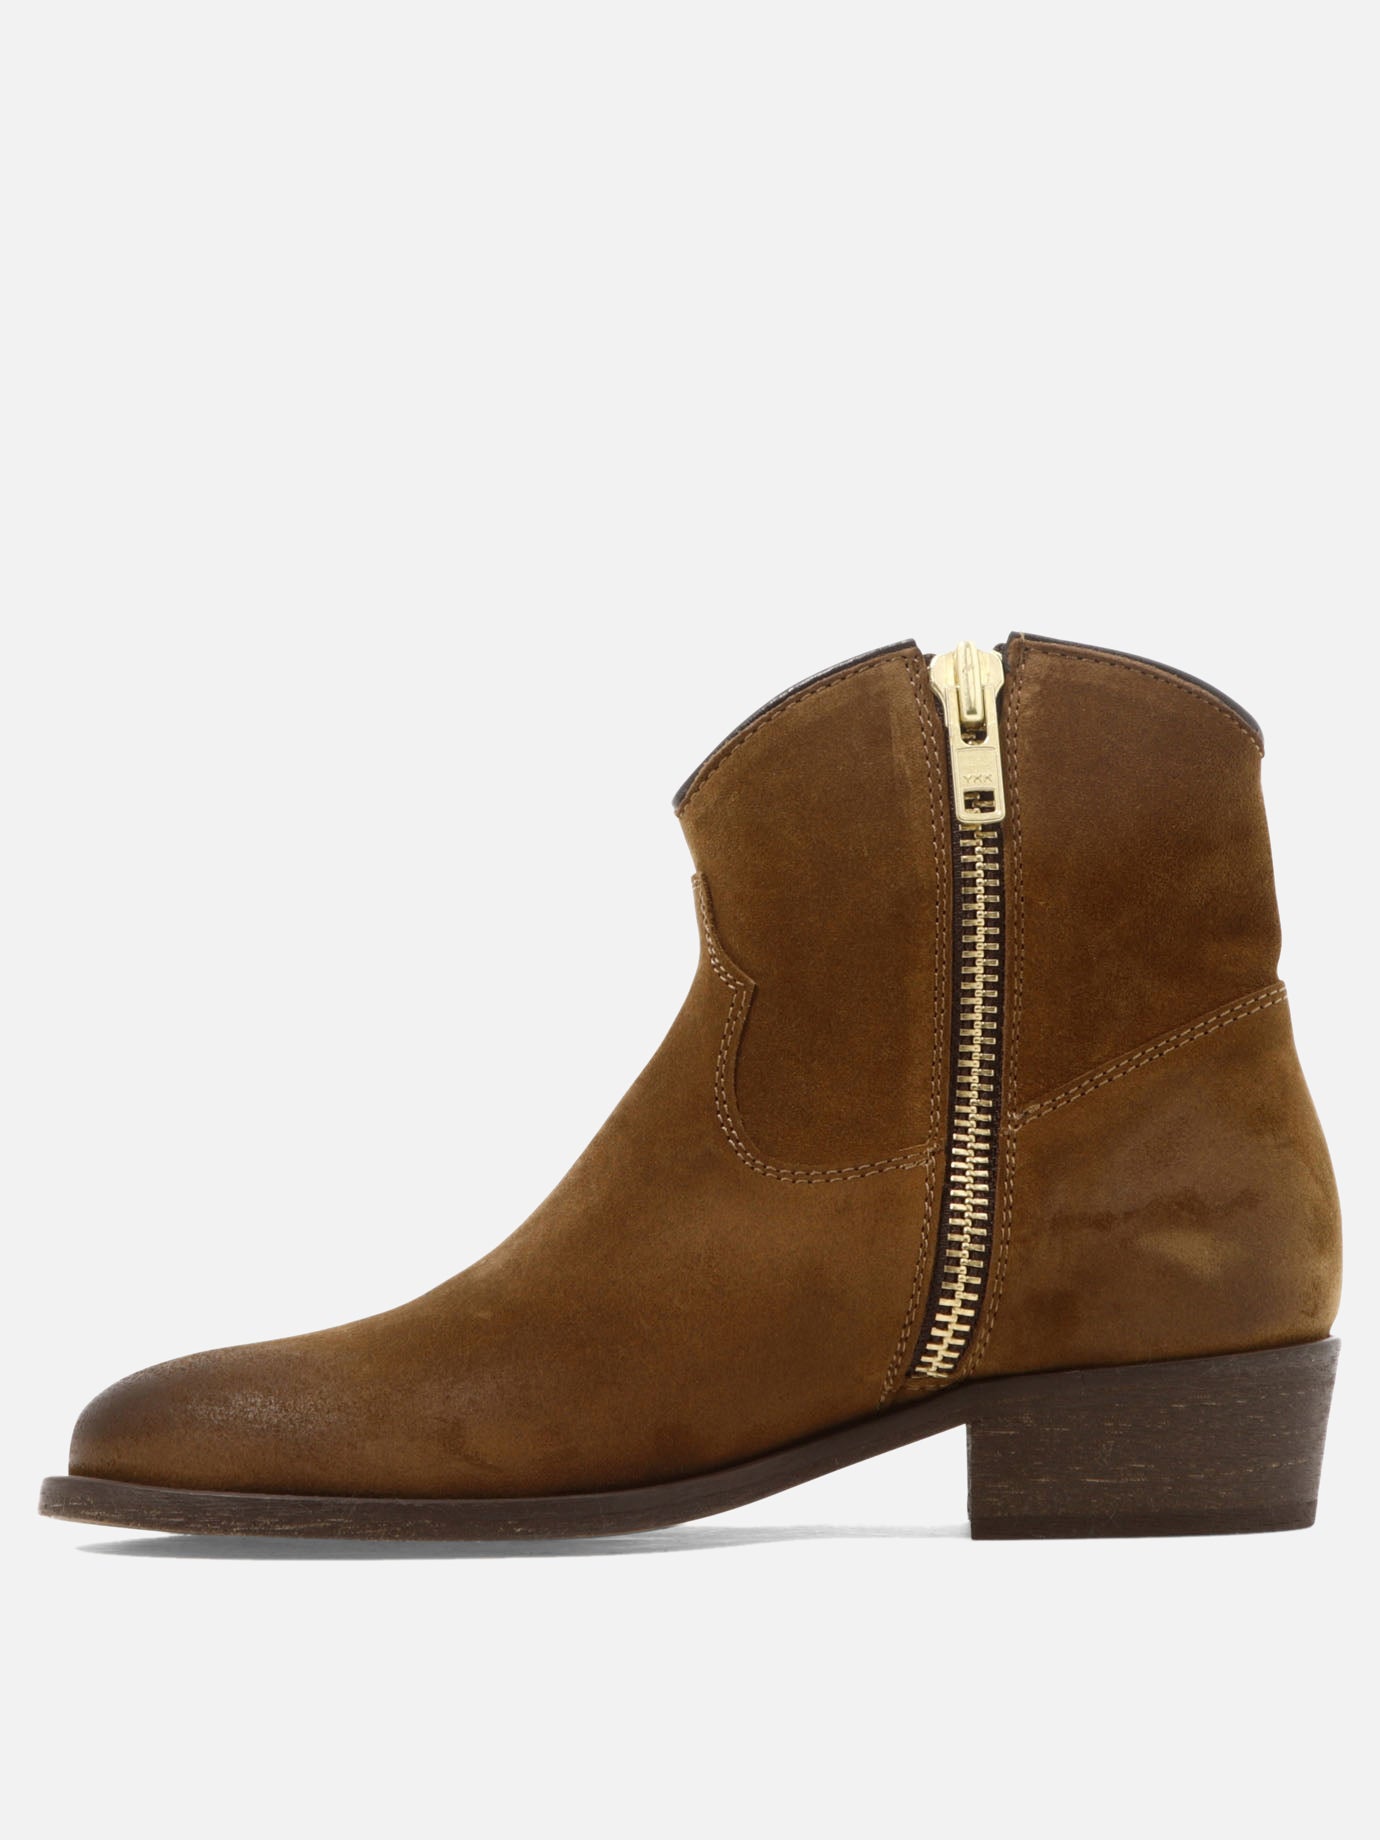 "Martora" ankle boots